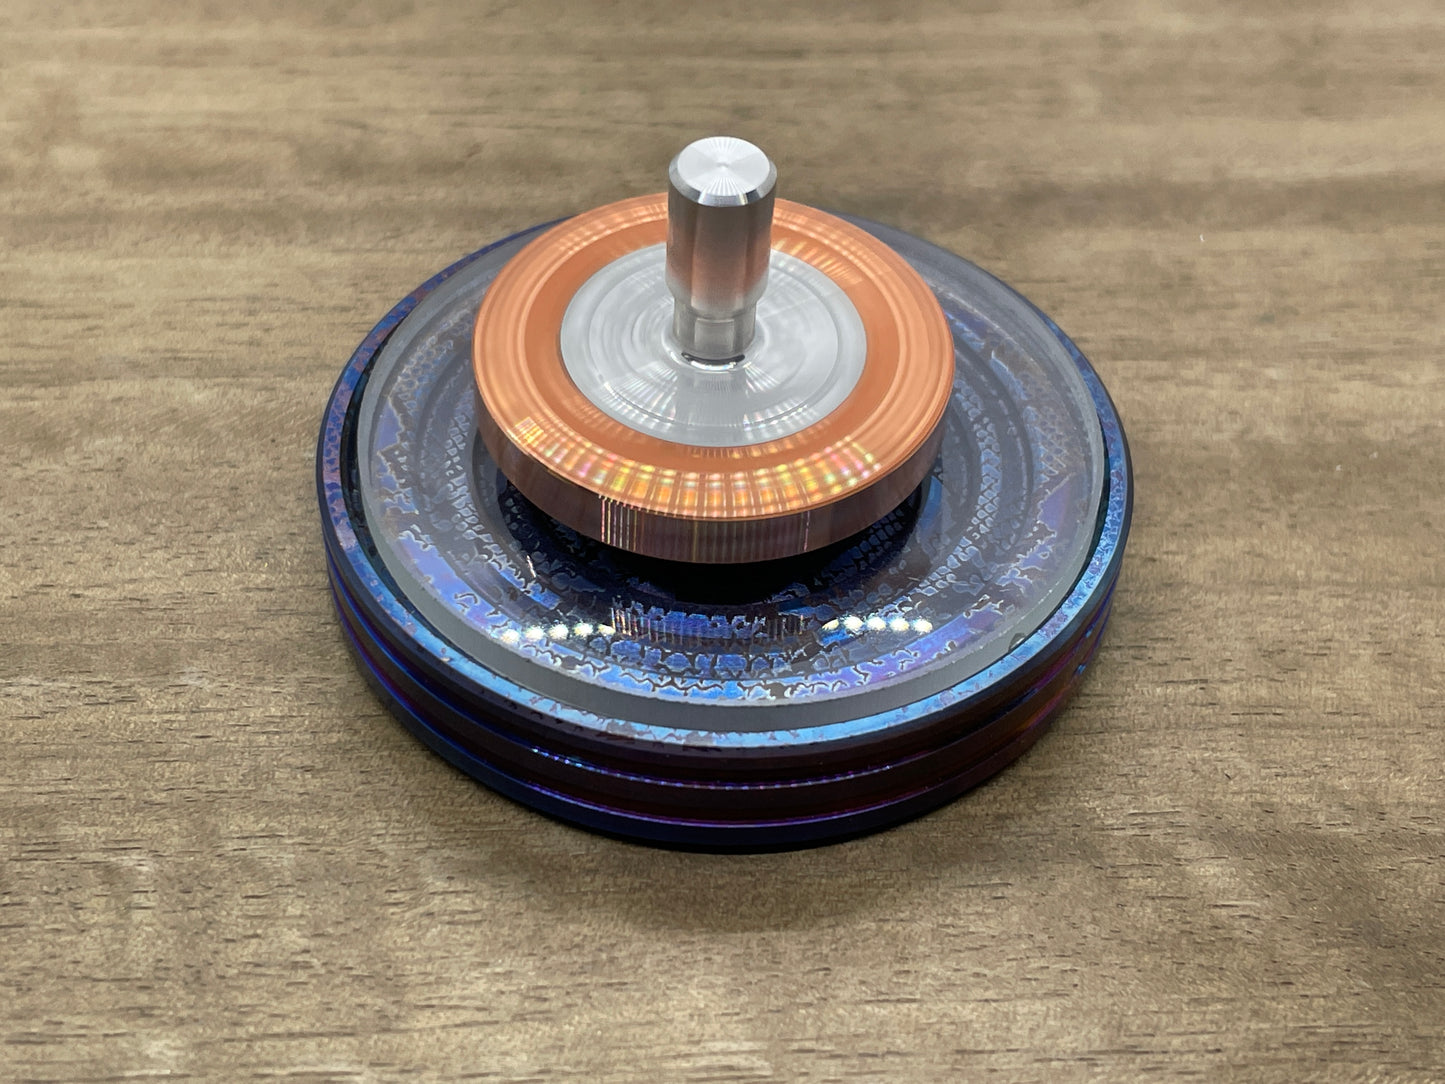 The OWL Copper Spinning Top PERFORMER - Alu Aerospace stem